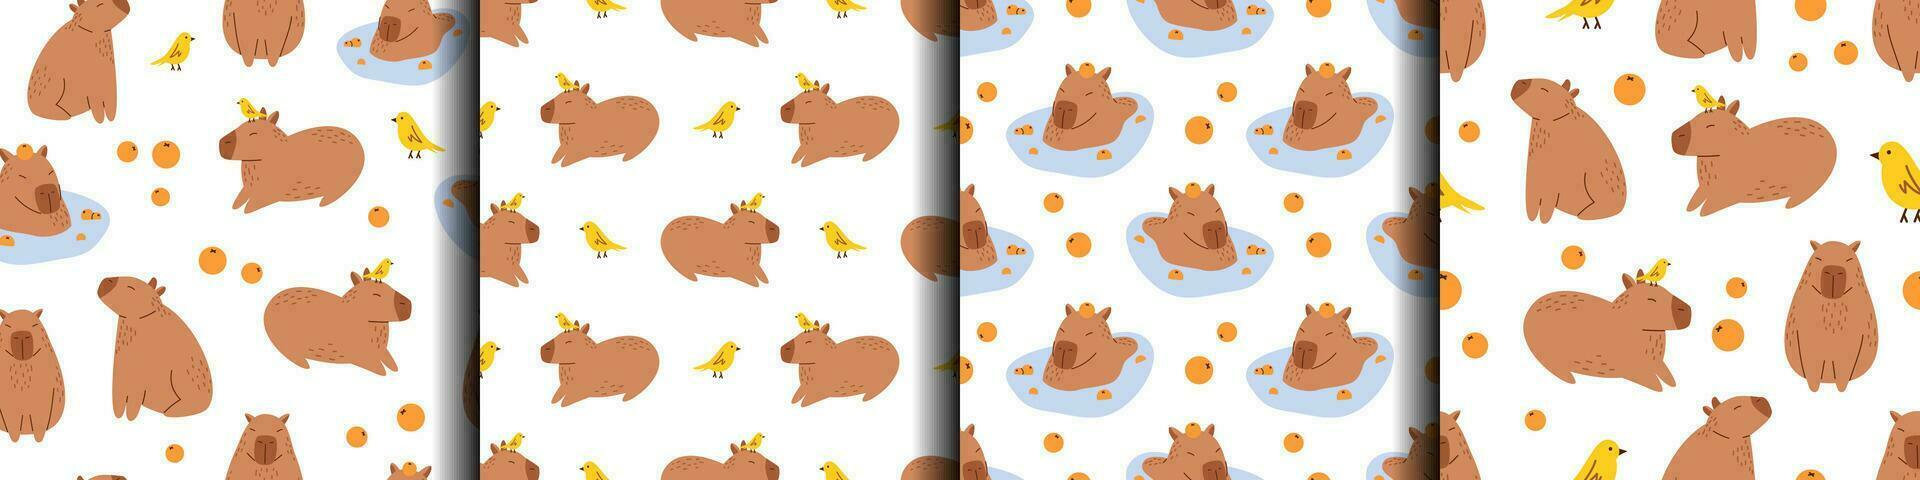 Vector set of seamless patterns with funny capybaras. Background collection with amusing capibaras. Cute capybaras relaxing with mandarin oranges and birds. South American adorable animal patterns.